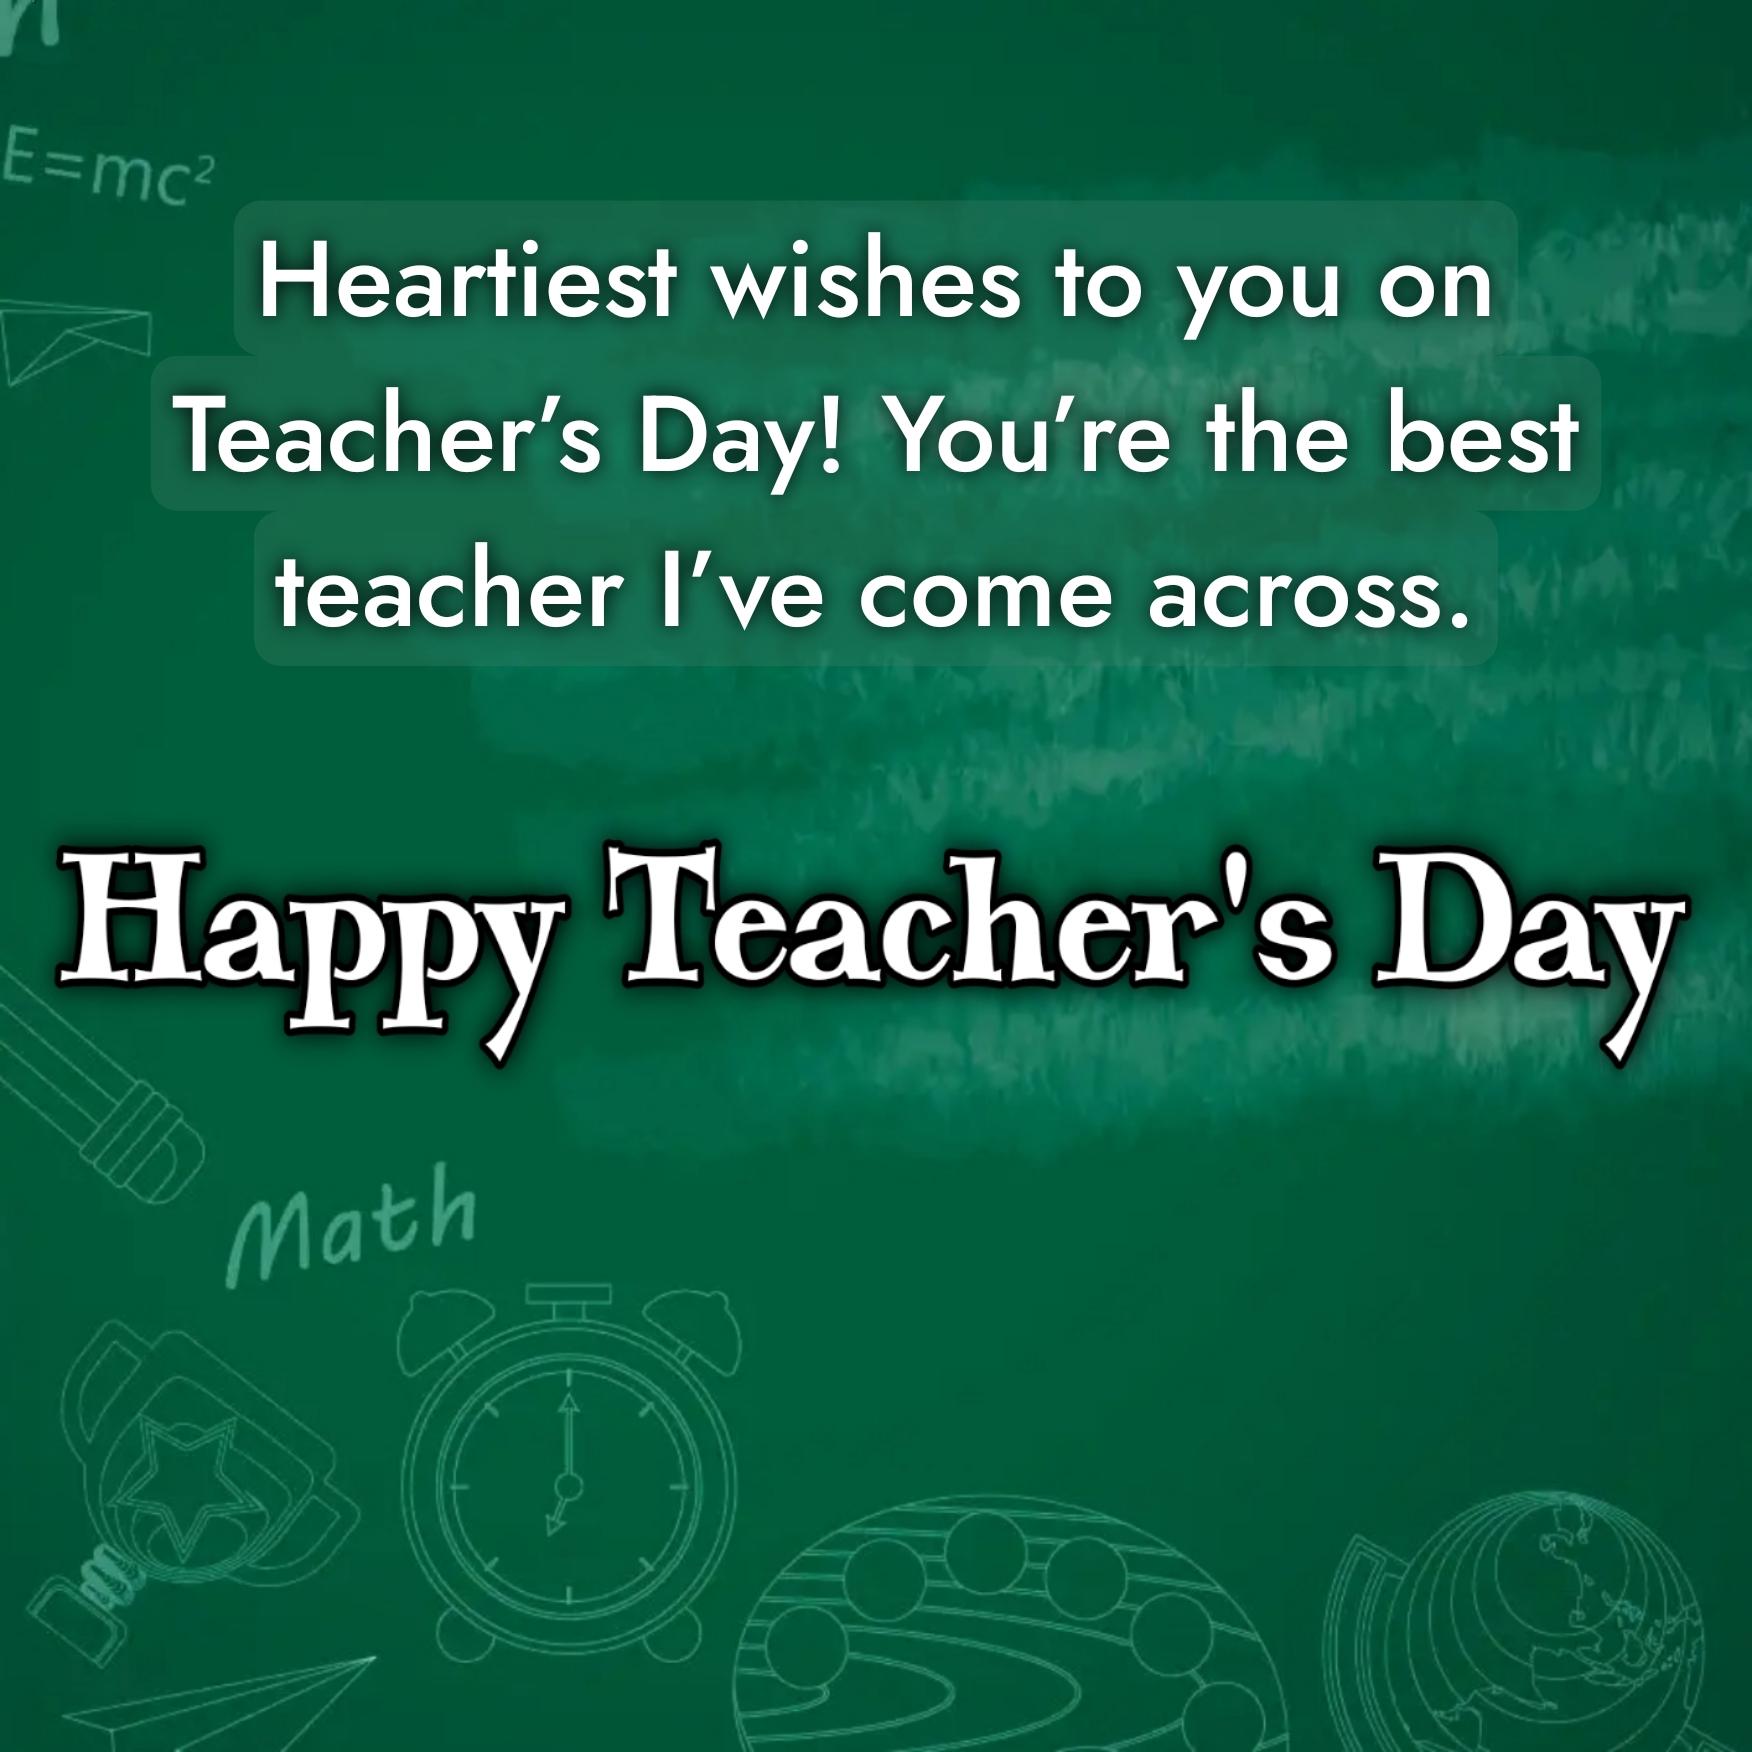 Heartiest wishes to you on Teachers Day